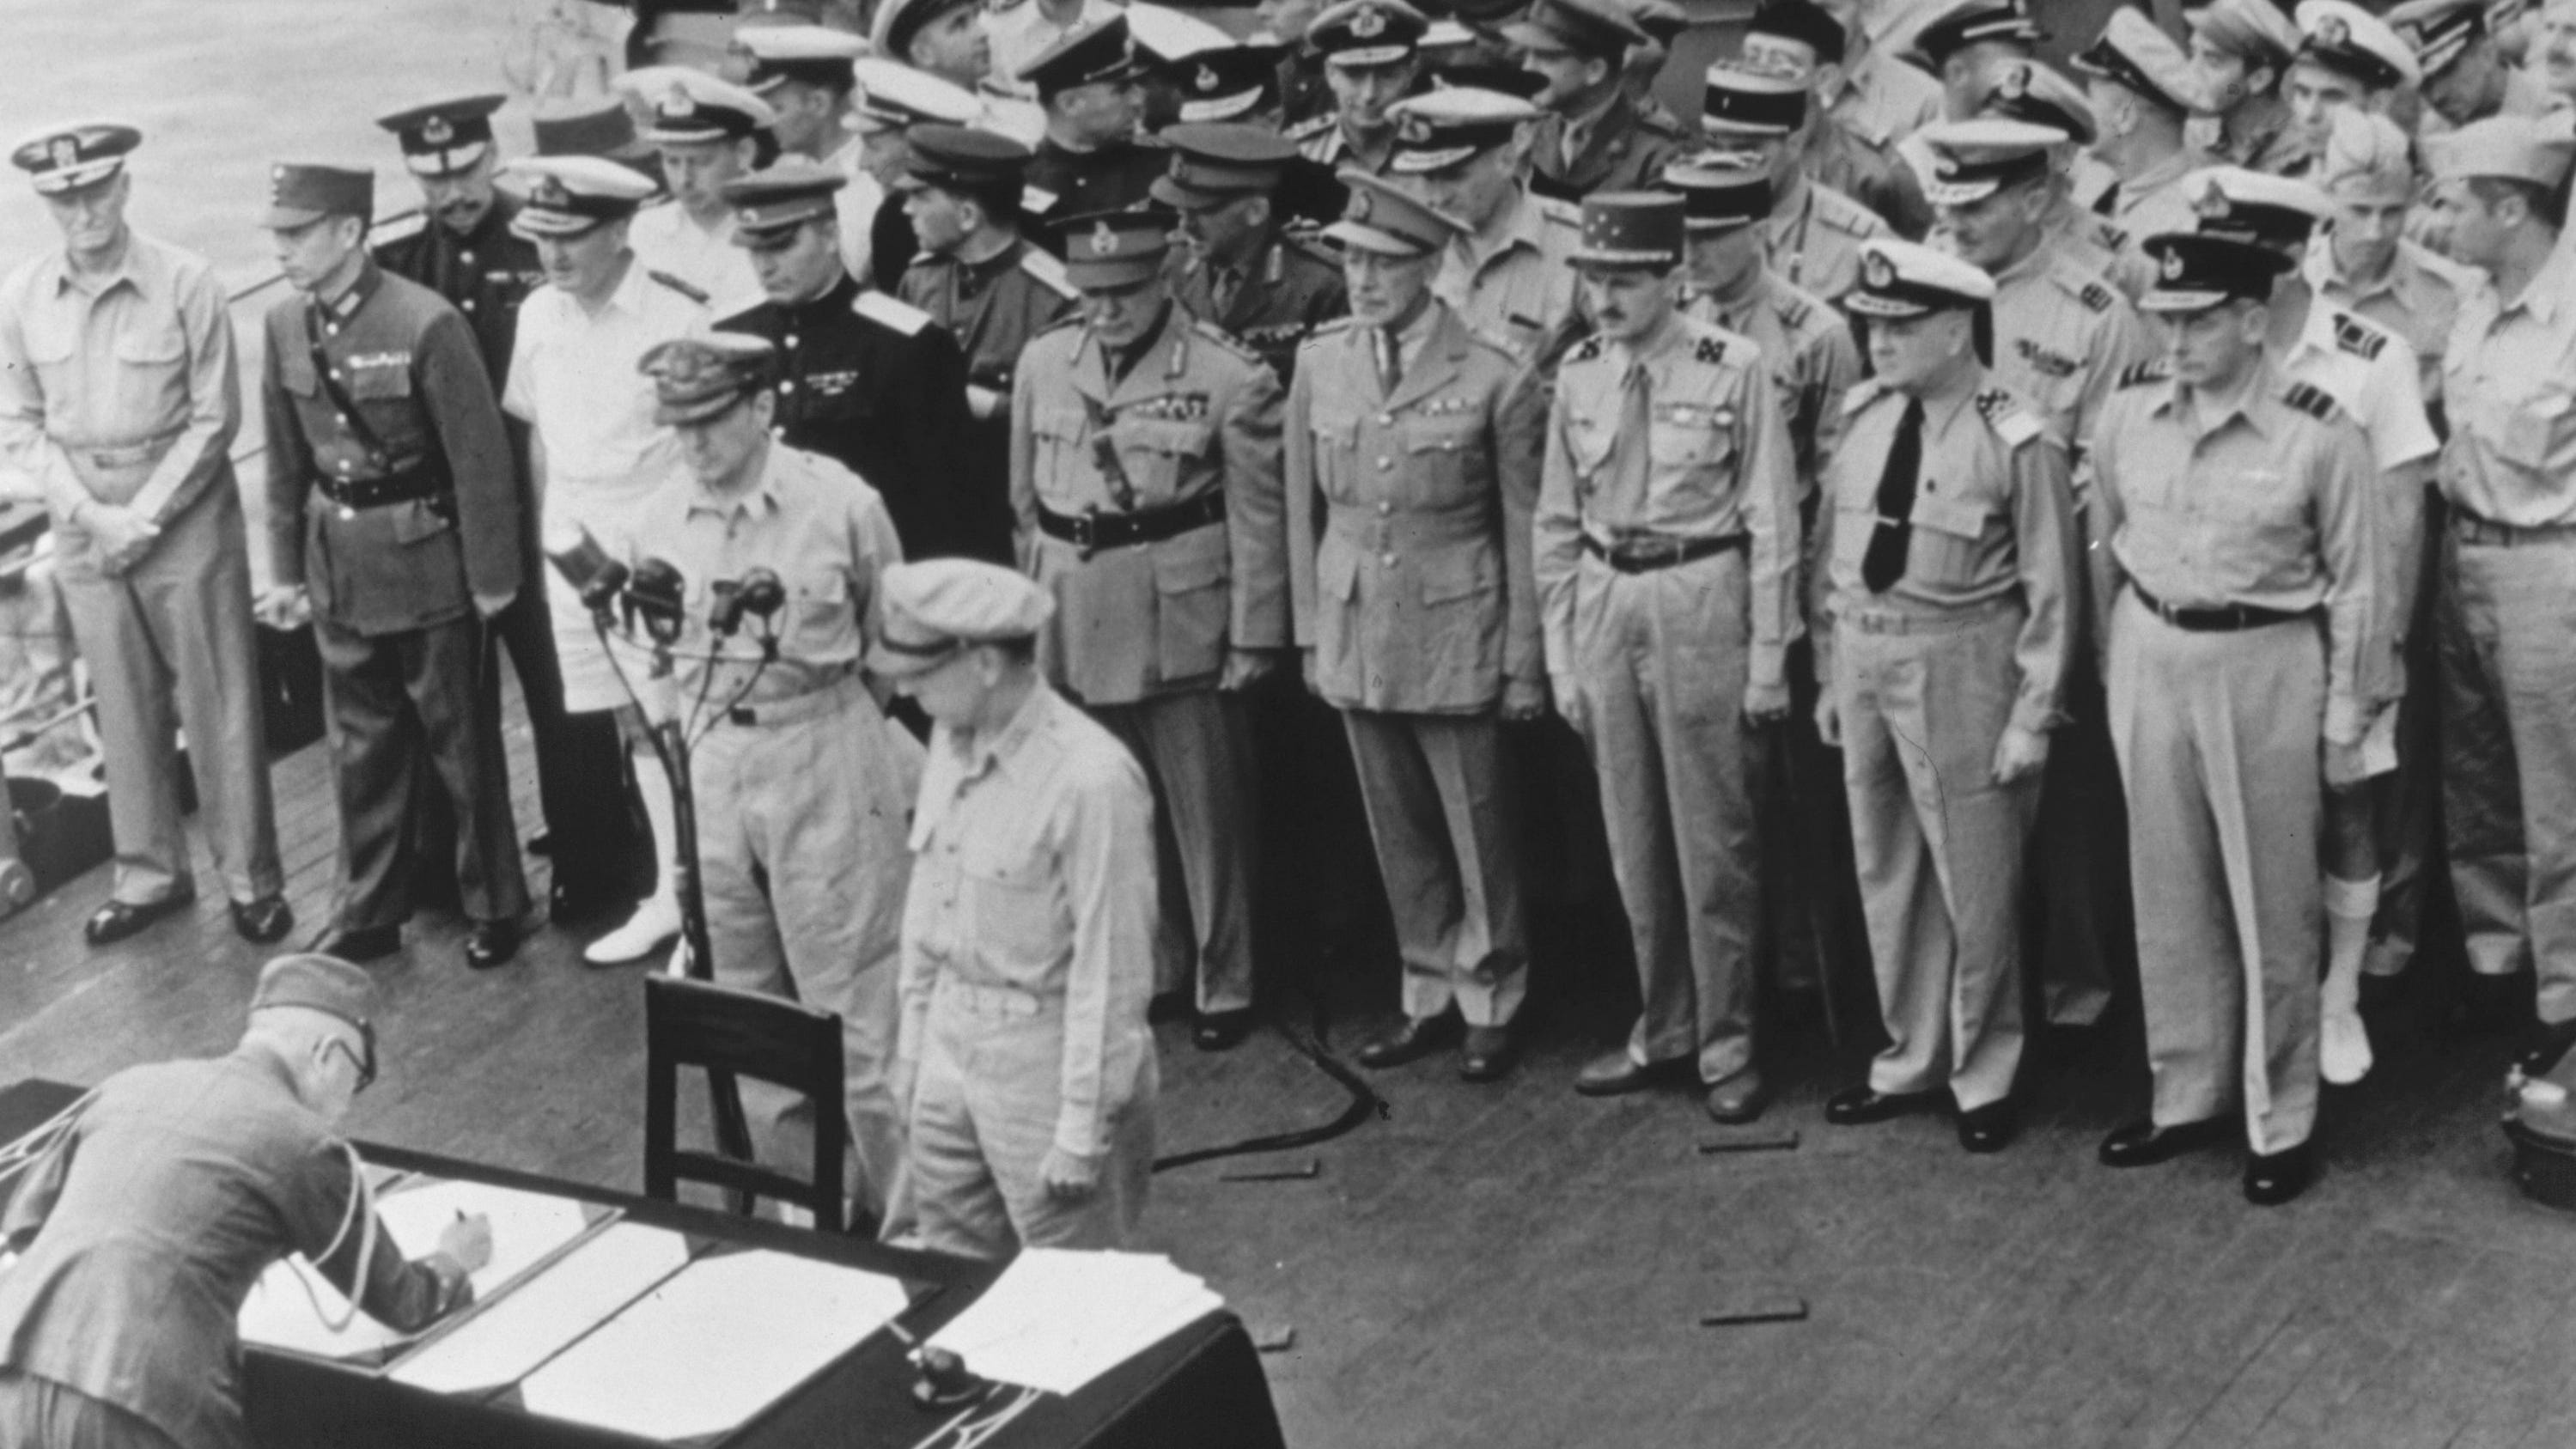 5 things to know about Japan's World War II surrender